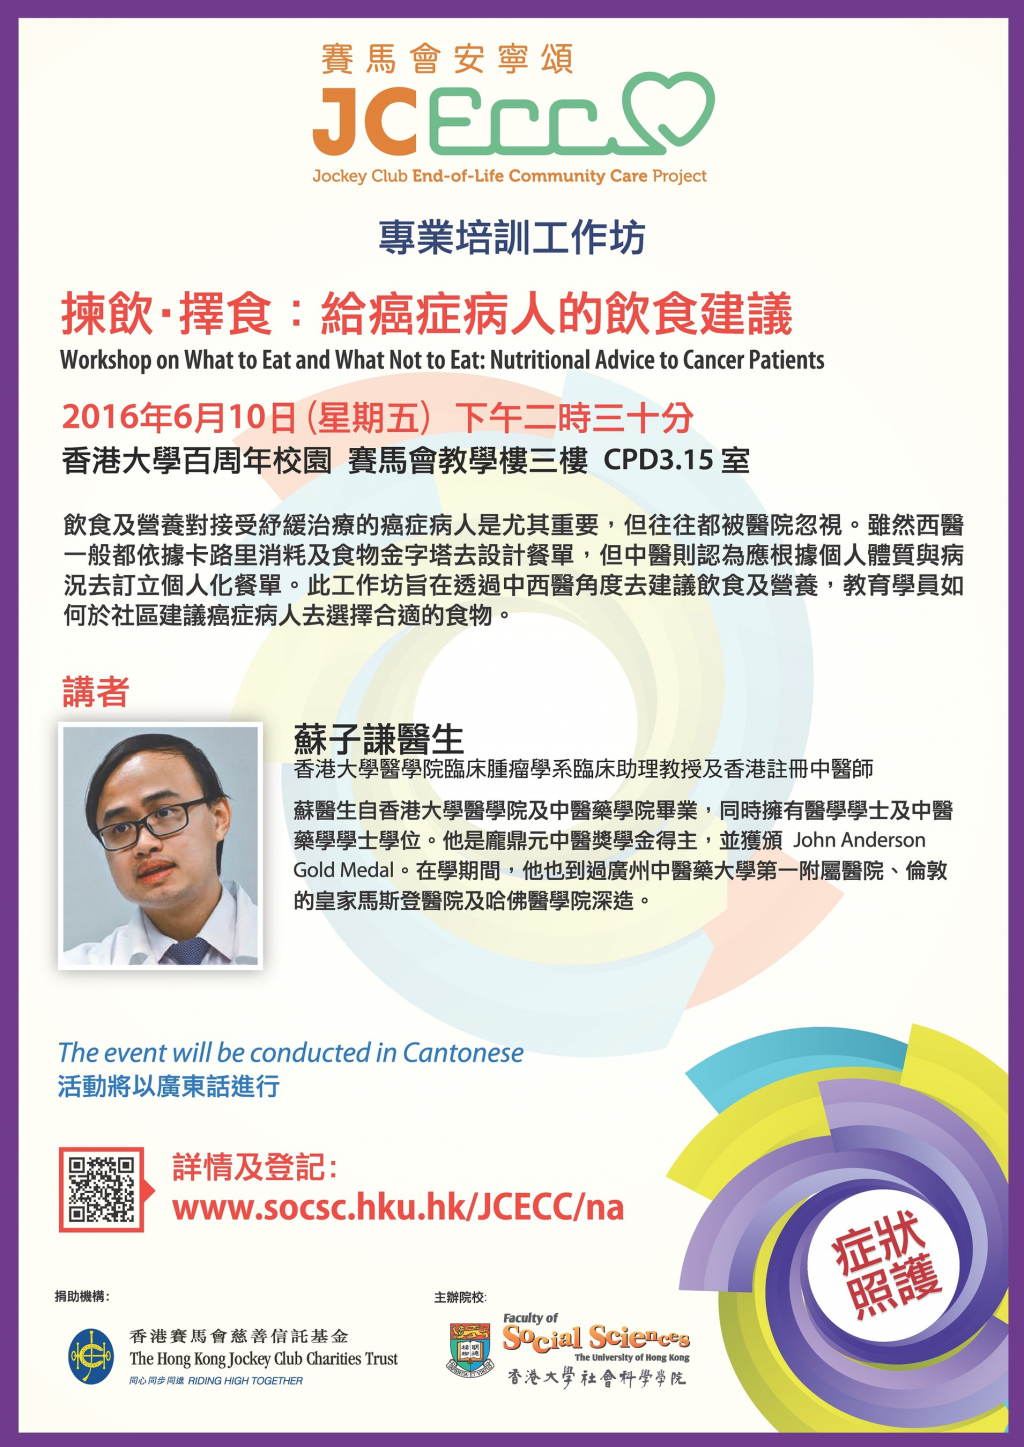 Workshop on What to Eat and What Not to Eat: Nutritional Advice to Cancer Patients 揀飲・擇食：給癌症病人的飲食建議